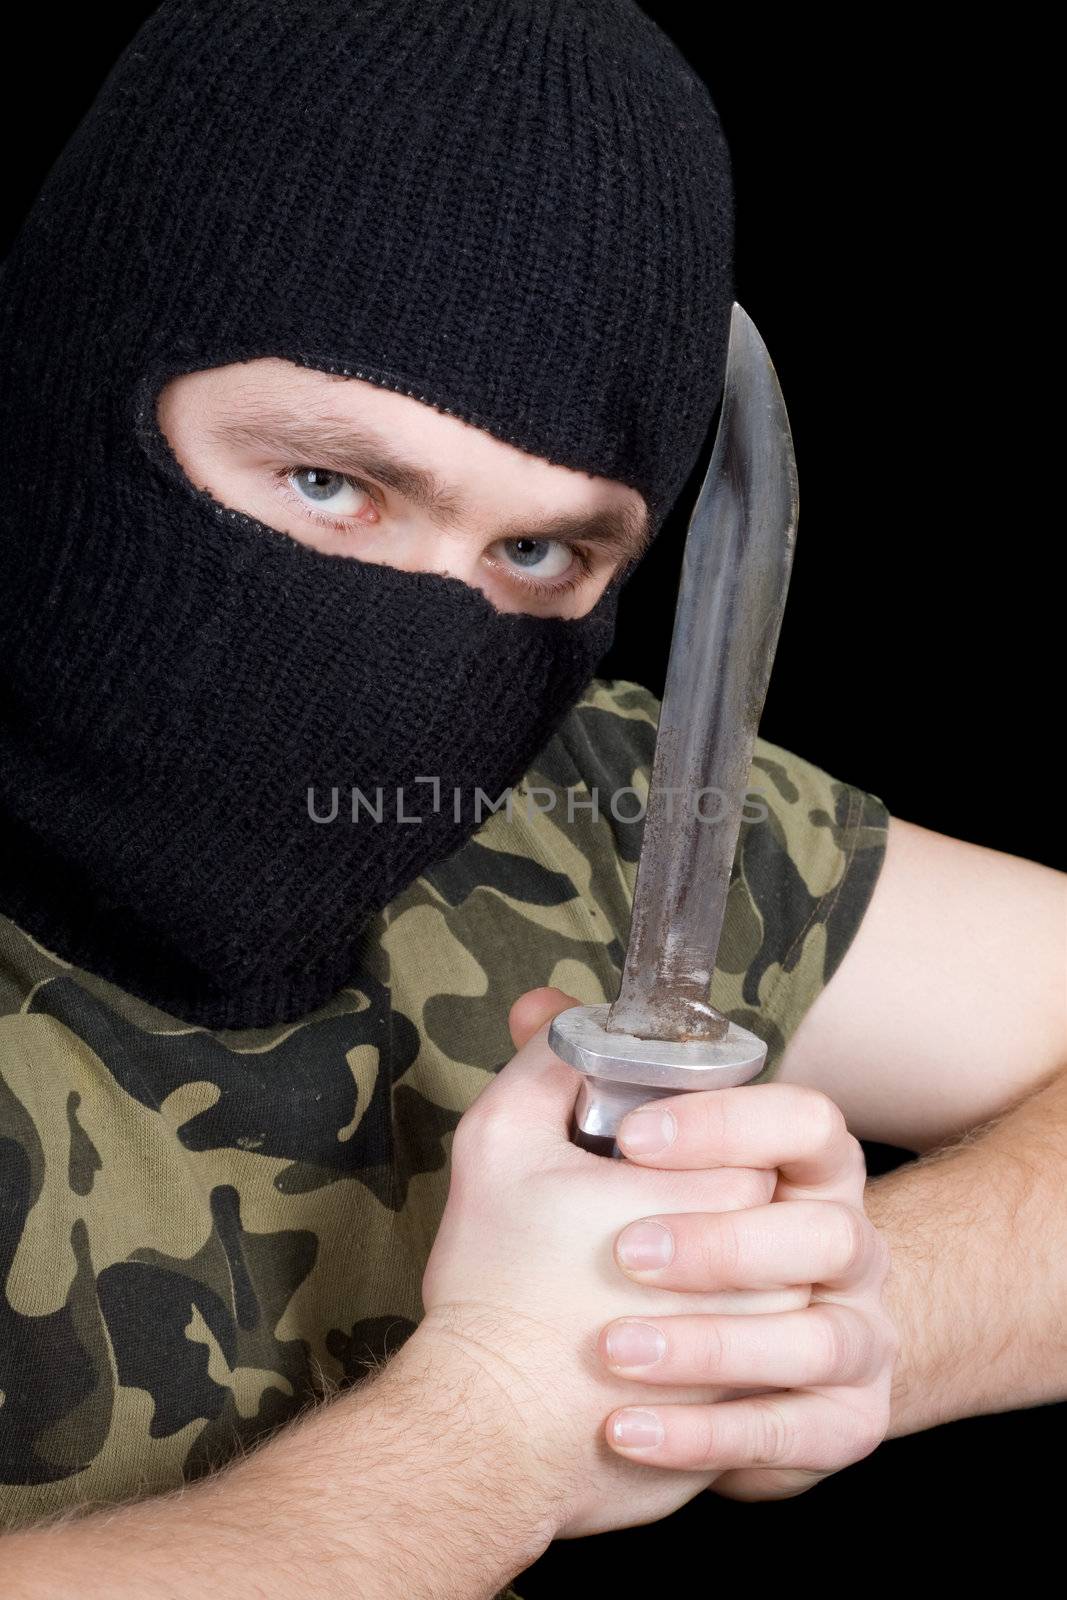 The murderer with a knife in a black mask